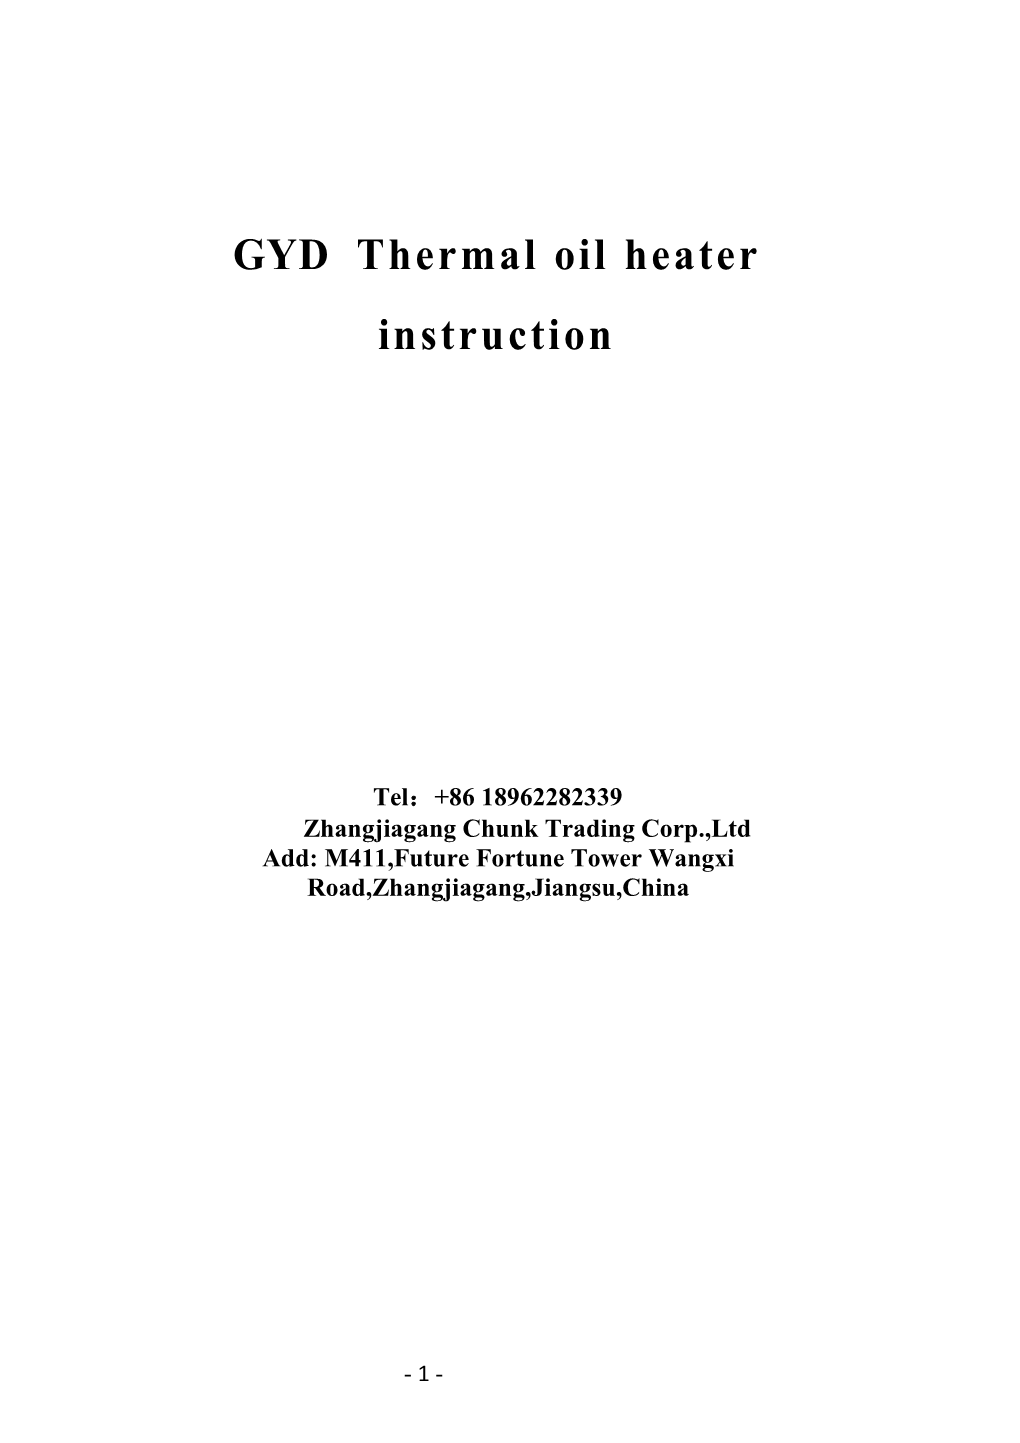 GYD Thermal Oil Heater Instruction